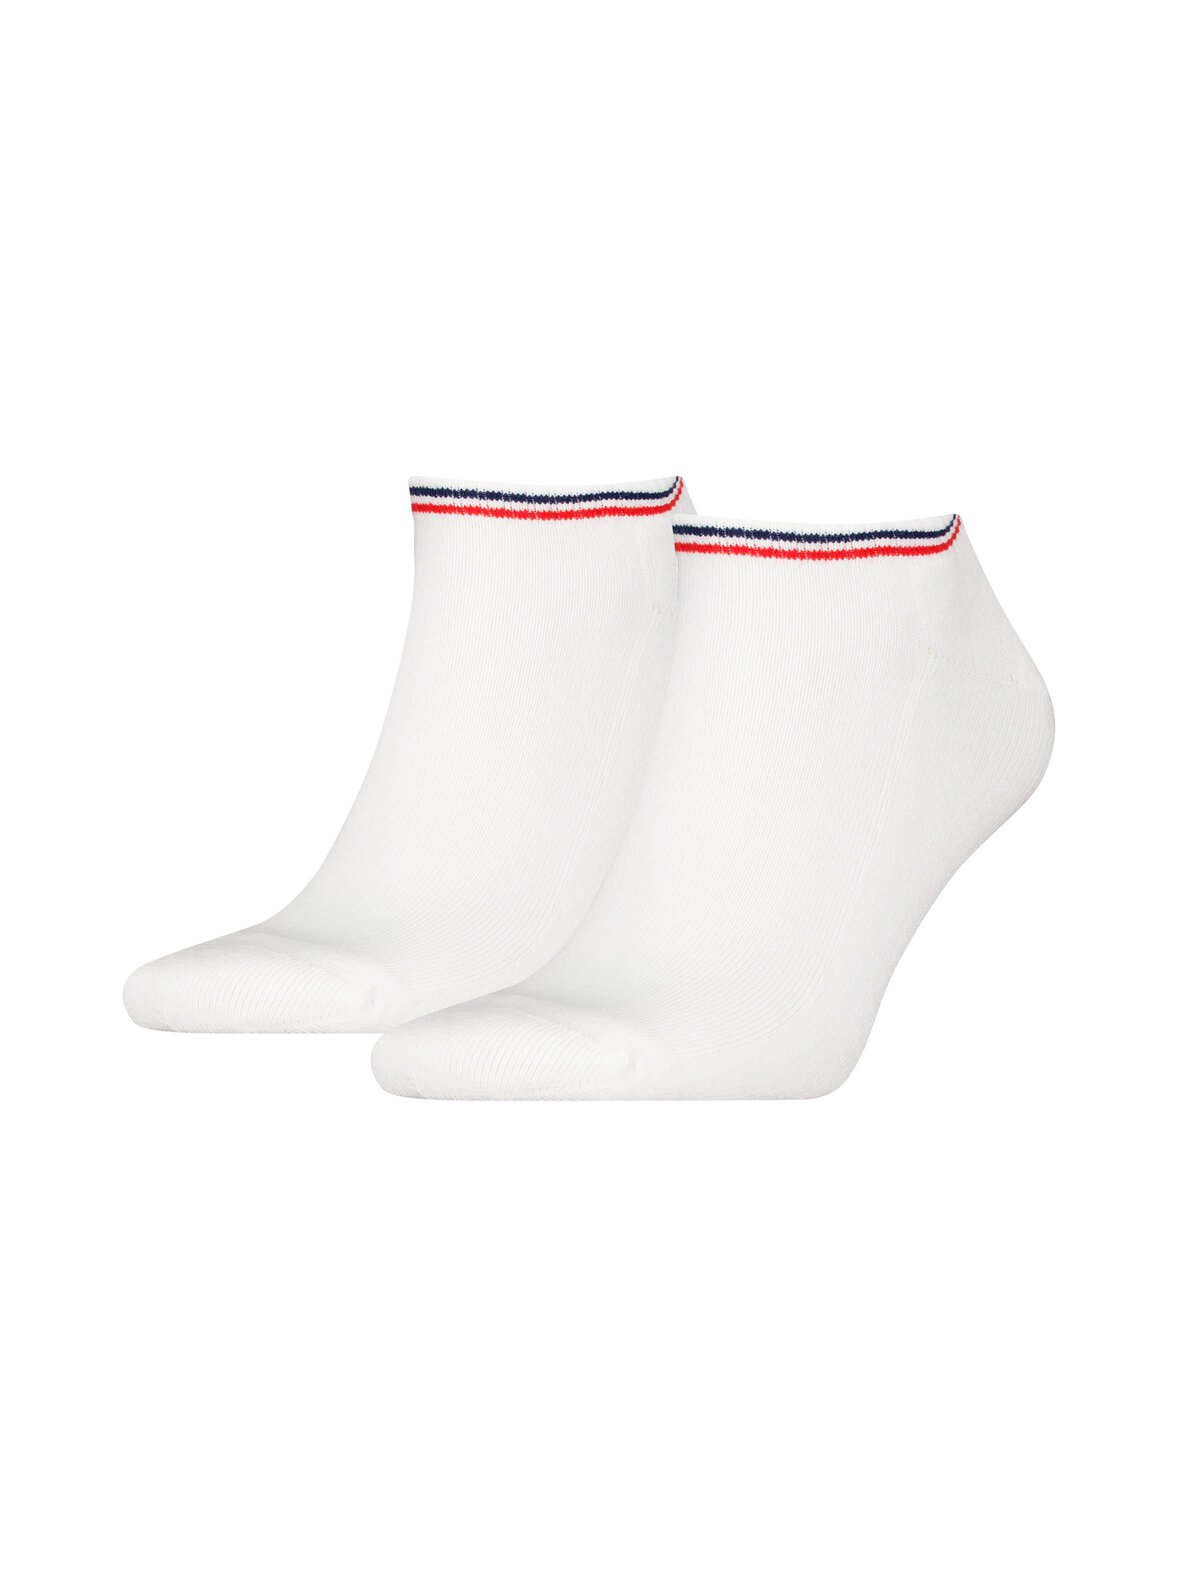 Tommy Hilfiger Iconic sneaker -sukat 2-pack